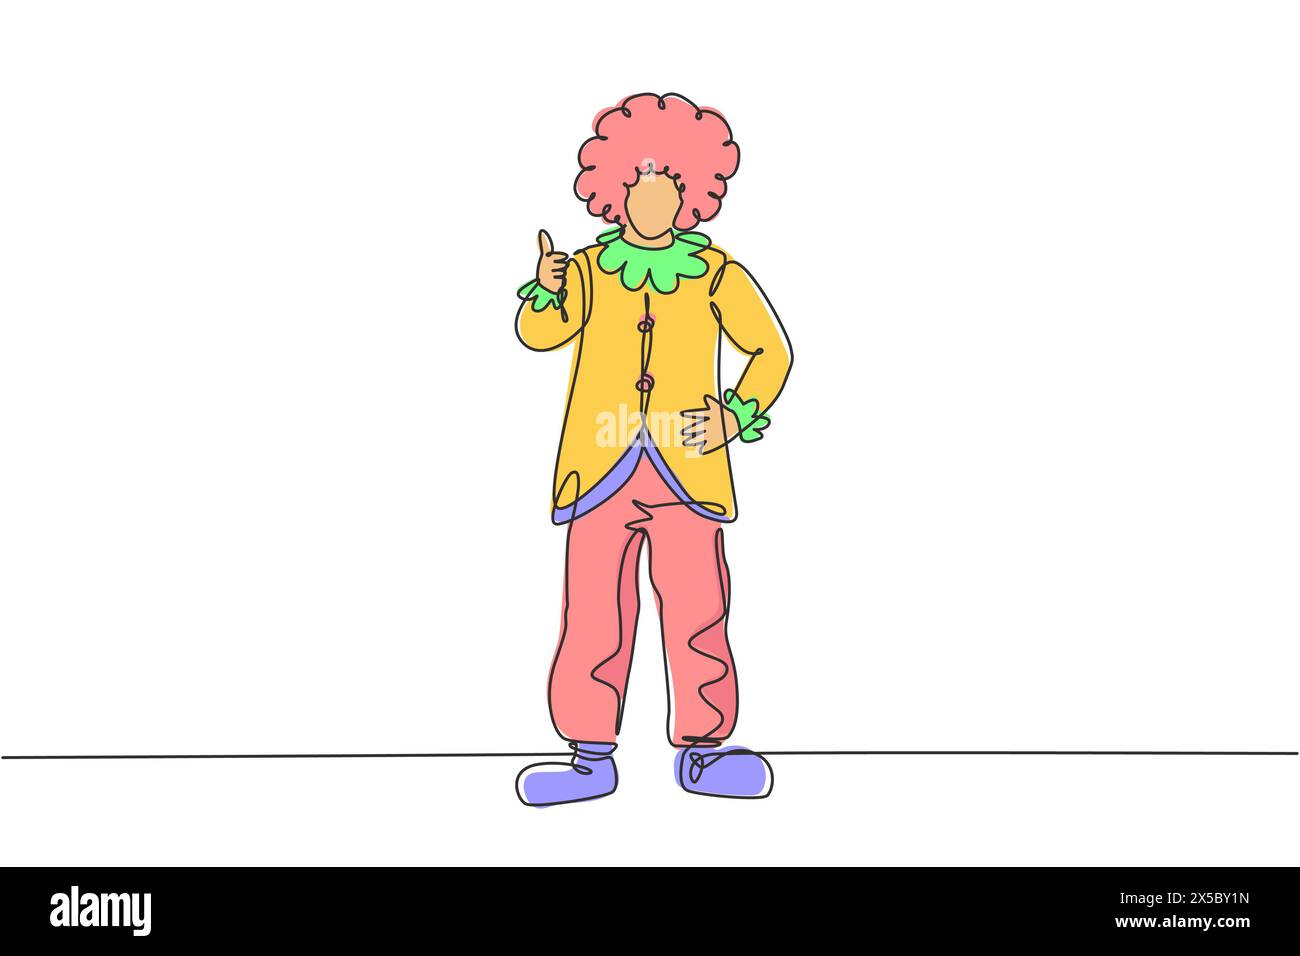 Continuous one line drawing clown stands with a thumbs-up gesture wearing wig and clown costume ready to entertain the audience in the circus arena. S Stock Vector